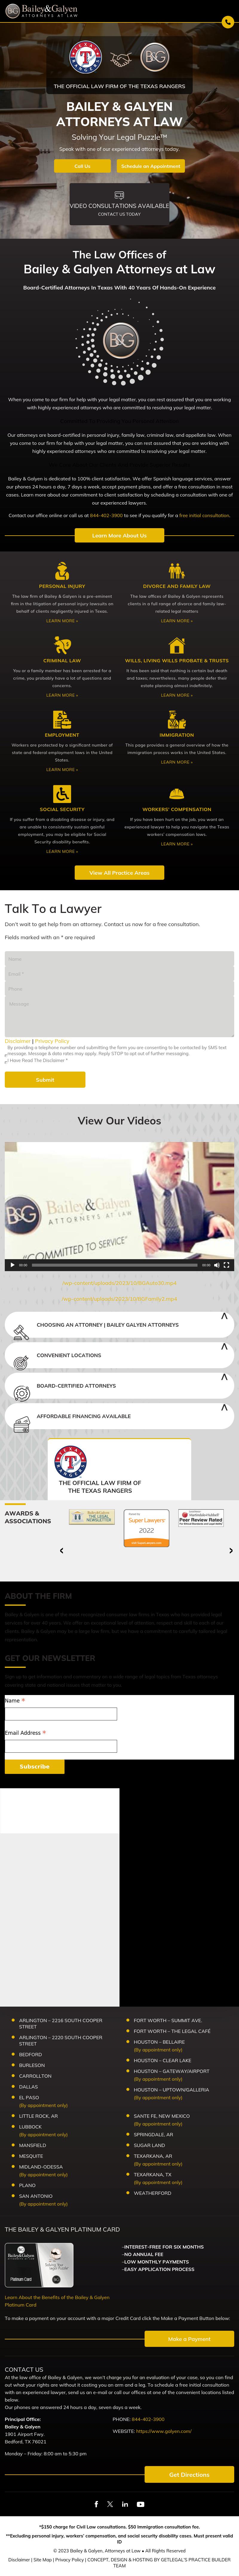 Bailey & Galyen, Attorneys at Law - Weatherford TX Lawyers